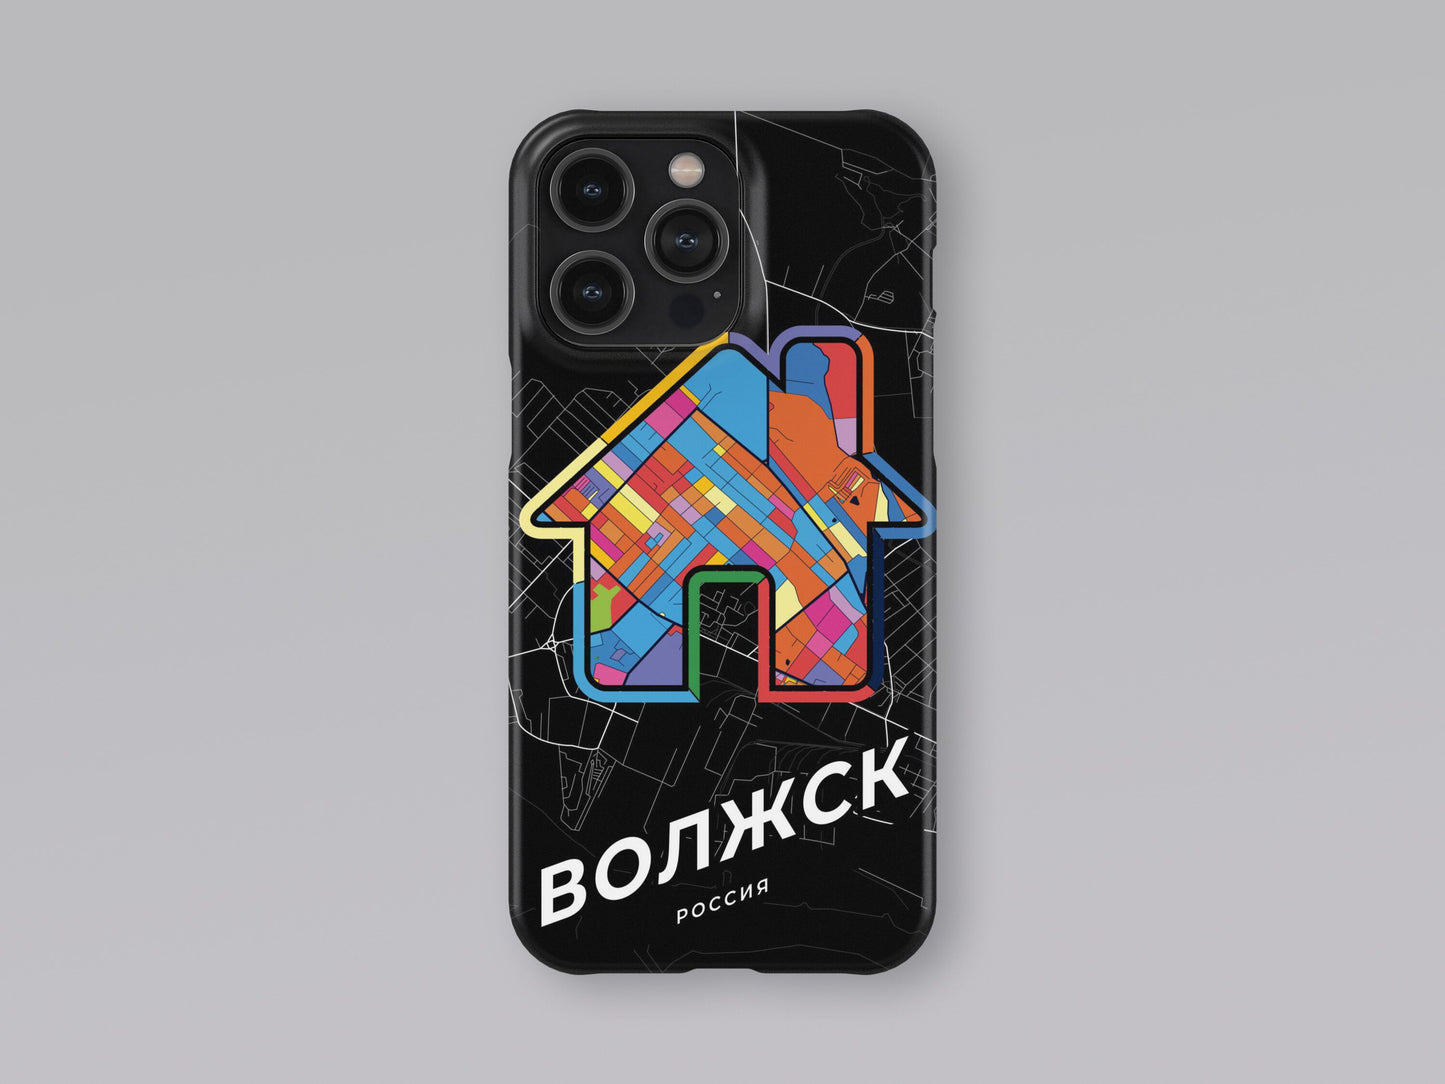 Volzhsk Russia slim phone case with colorful icon 3